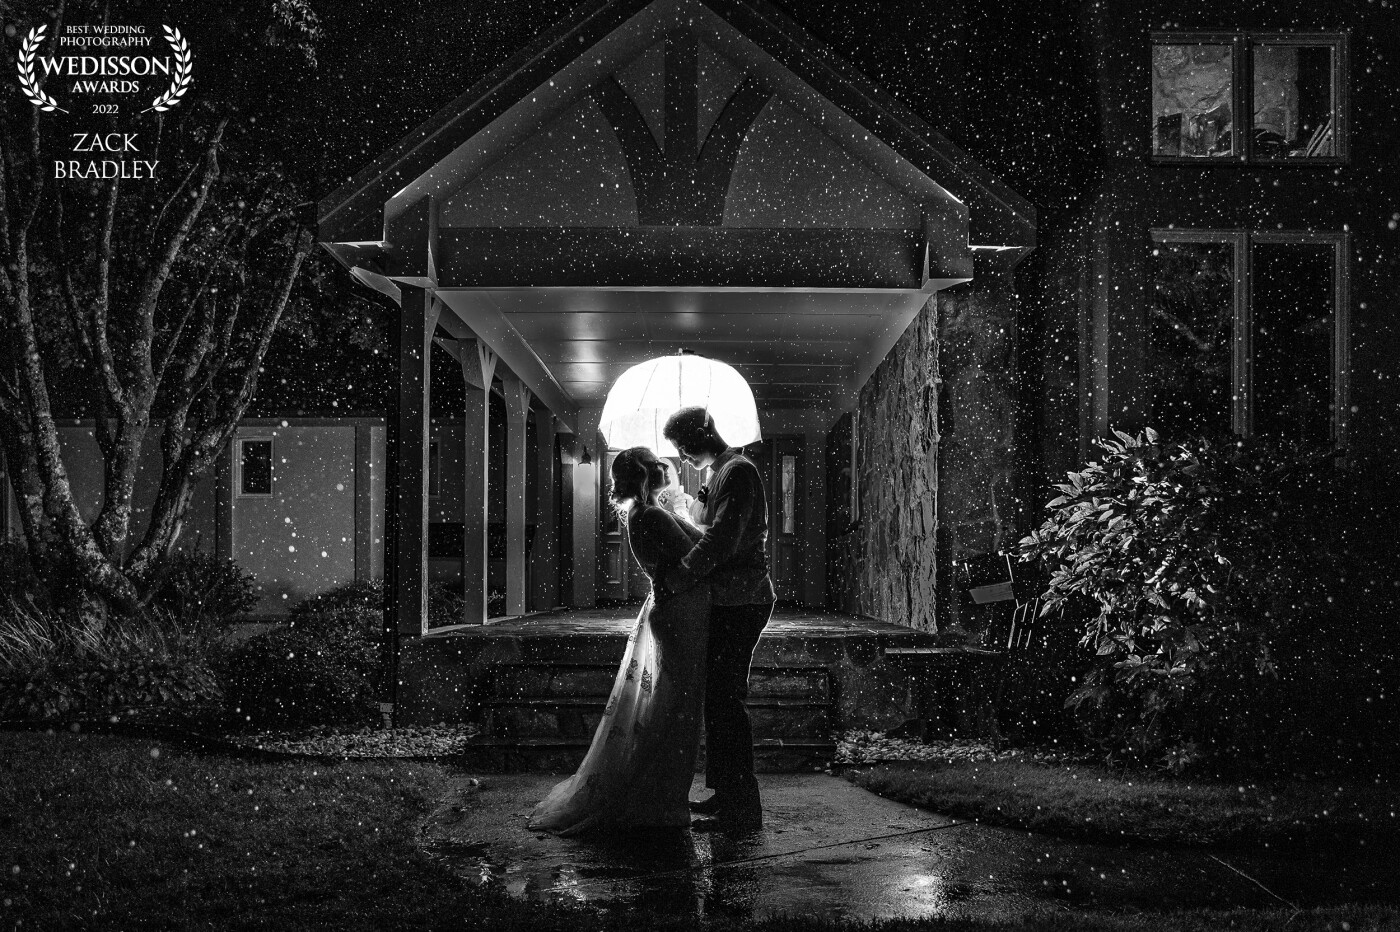 Rain doesn't have to be a bad thing. In fact, it's thought to be good luck if it rains on your wedding day! This backlit image was taken during a lull in the downpour of the day. The bride and groom were awesome and more than happy to go play in the rain!